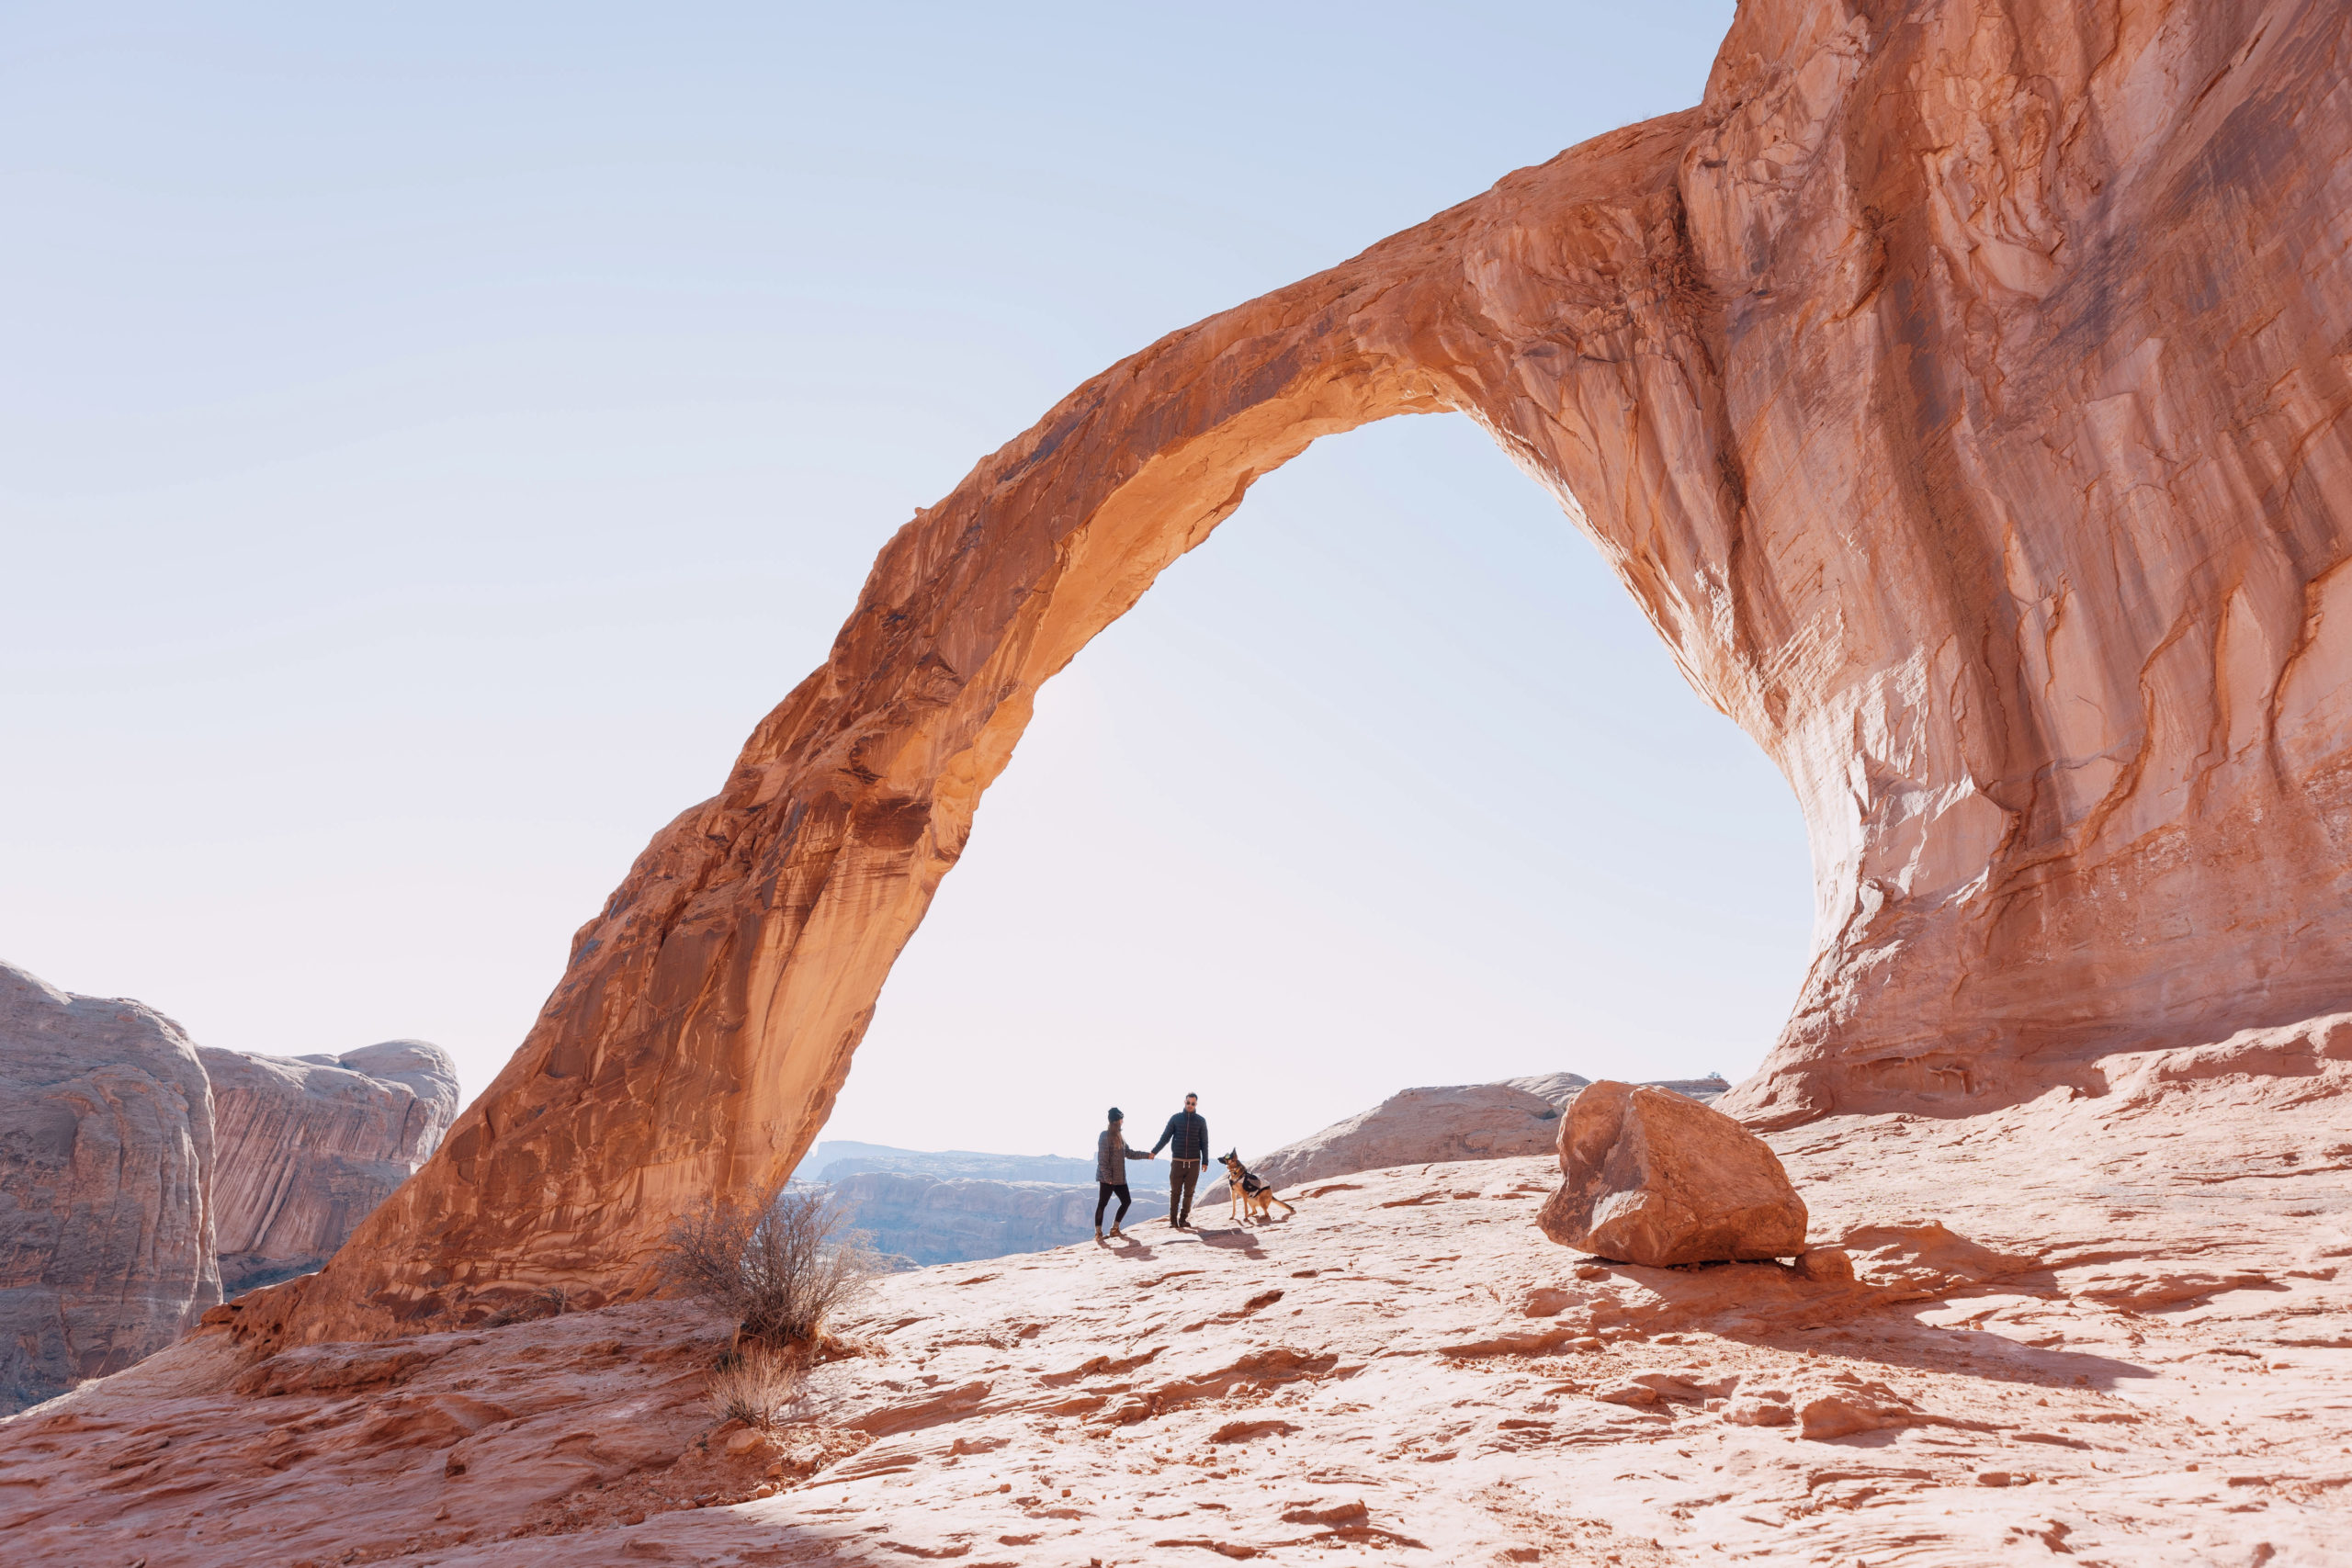 picture of a man, woman, and their dog hiking at corona arch in moab, utah. in the photo, the sun is shining bright behind the arch and the couple is holding hands walking through the center of the arch. the arch is a warm color of sandstone and there are broken pieces of rock in the desert landscape.